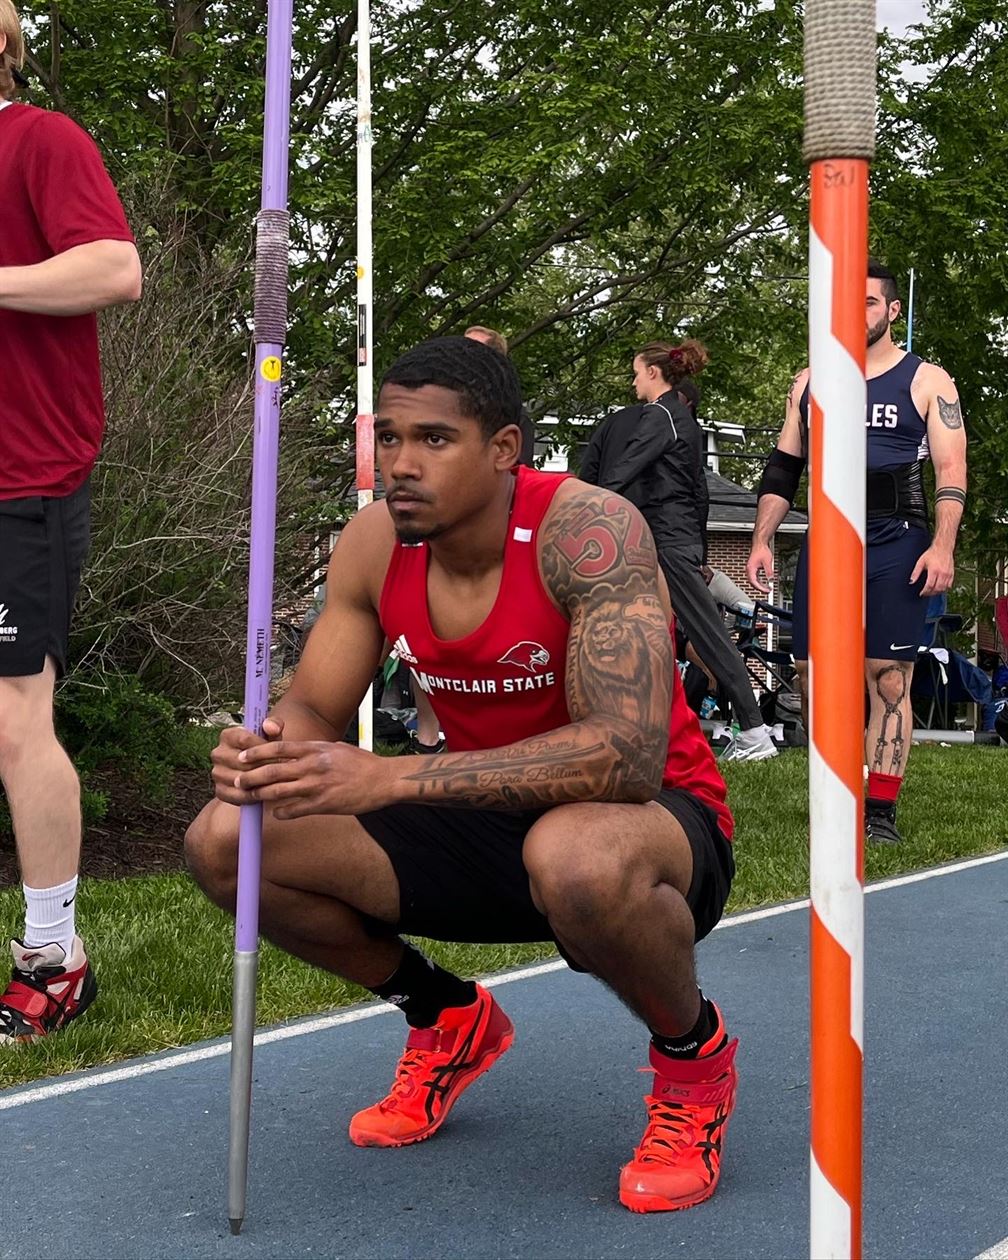 Valentine hit his career high last year in the NCAA Outdoor Championships and looks to replicate that success. Photo courtesy of Damien Valentine